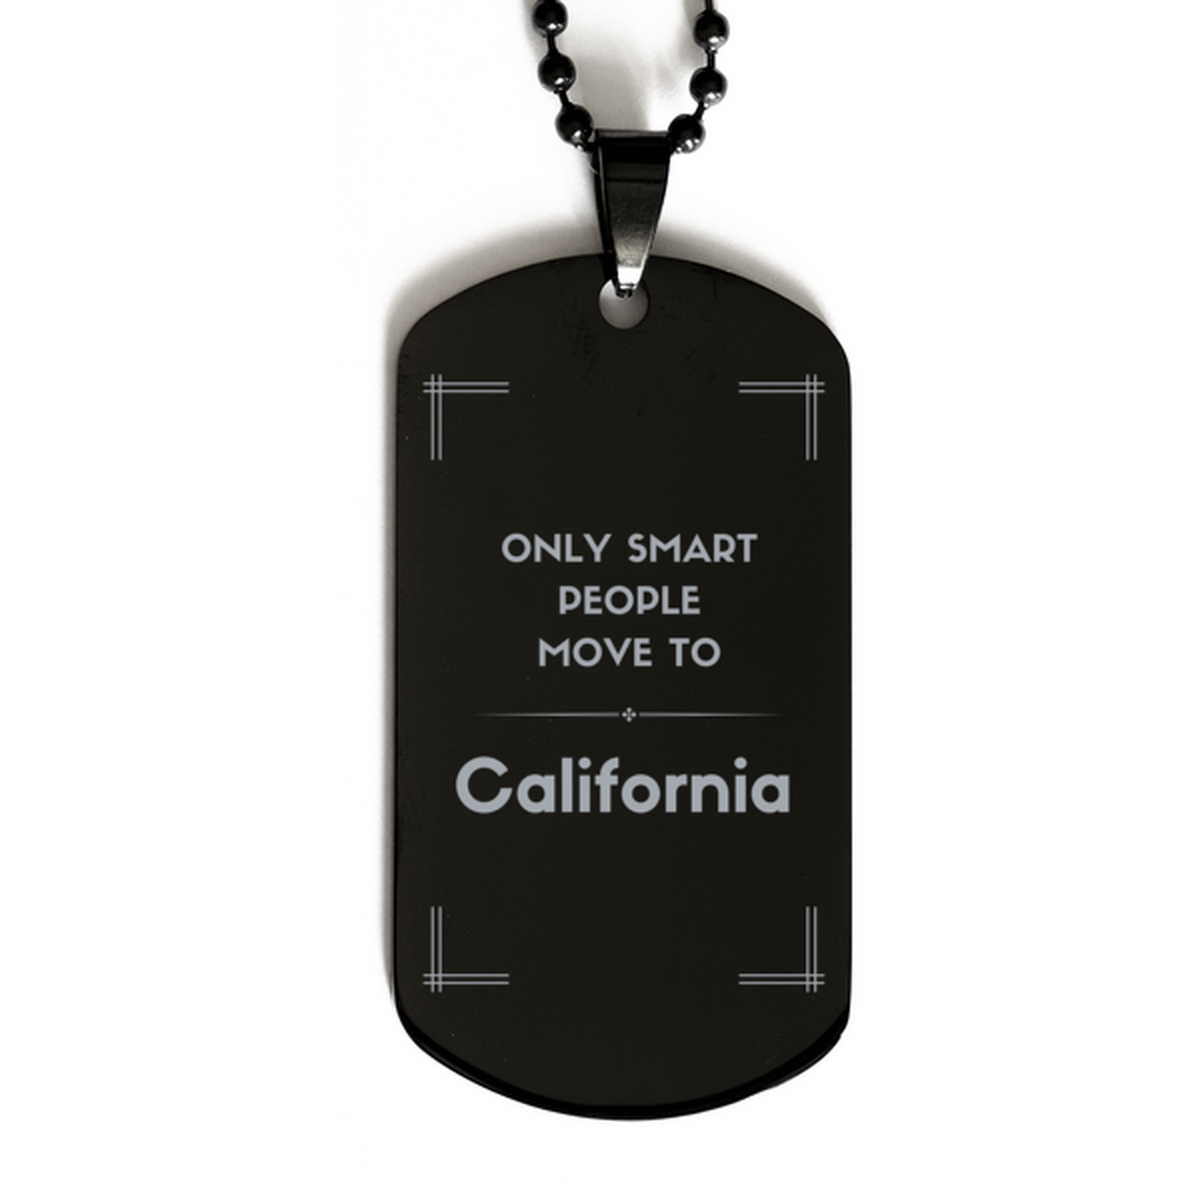 Only smart people move to California Black Dog Tag, Gag Gifts For California, Move to California Gifts for Friends Coworker Funny Saying Quote